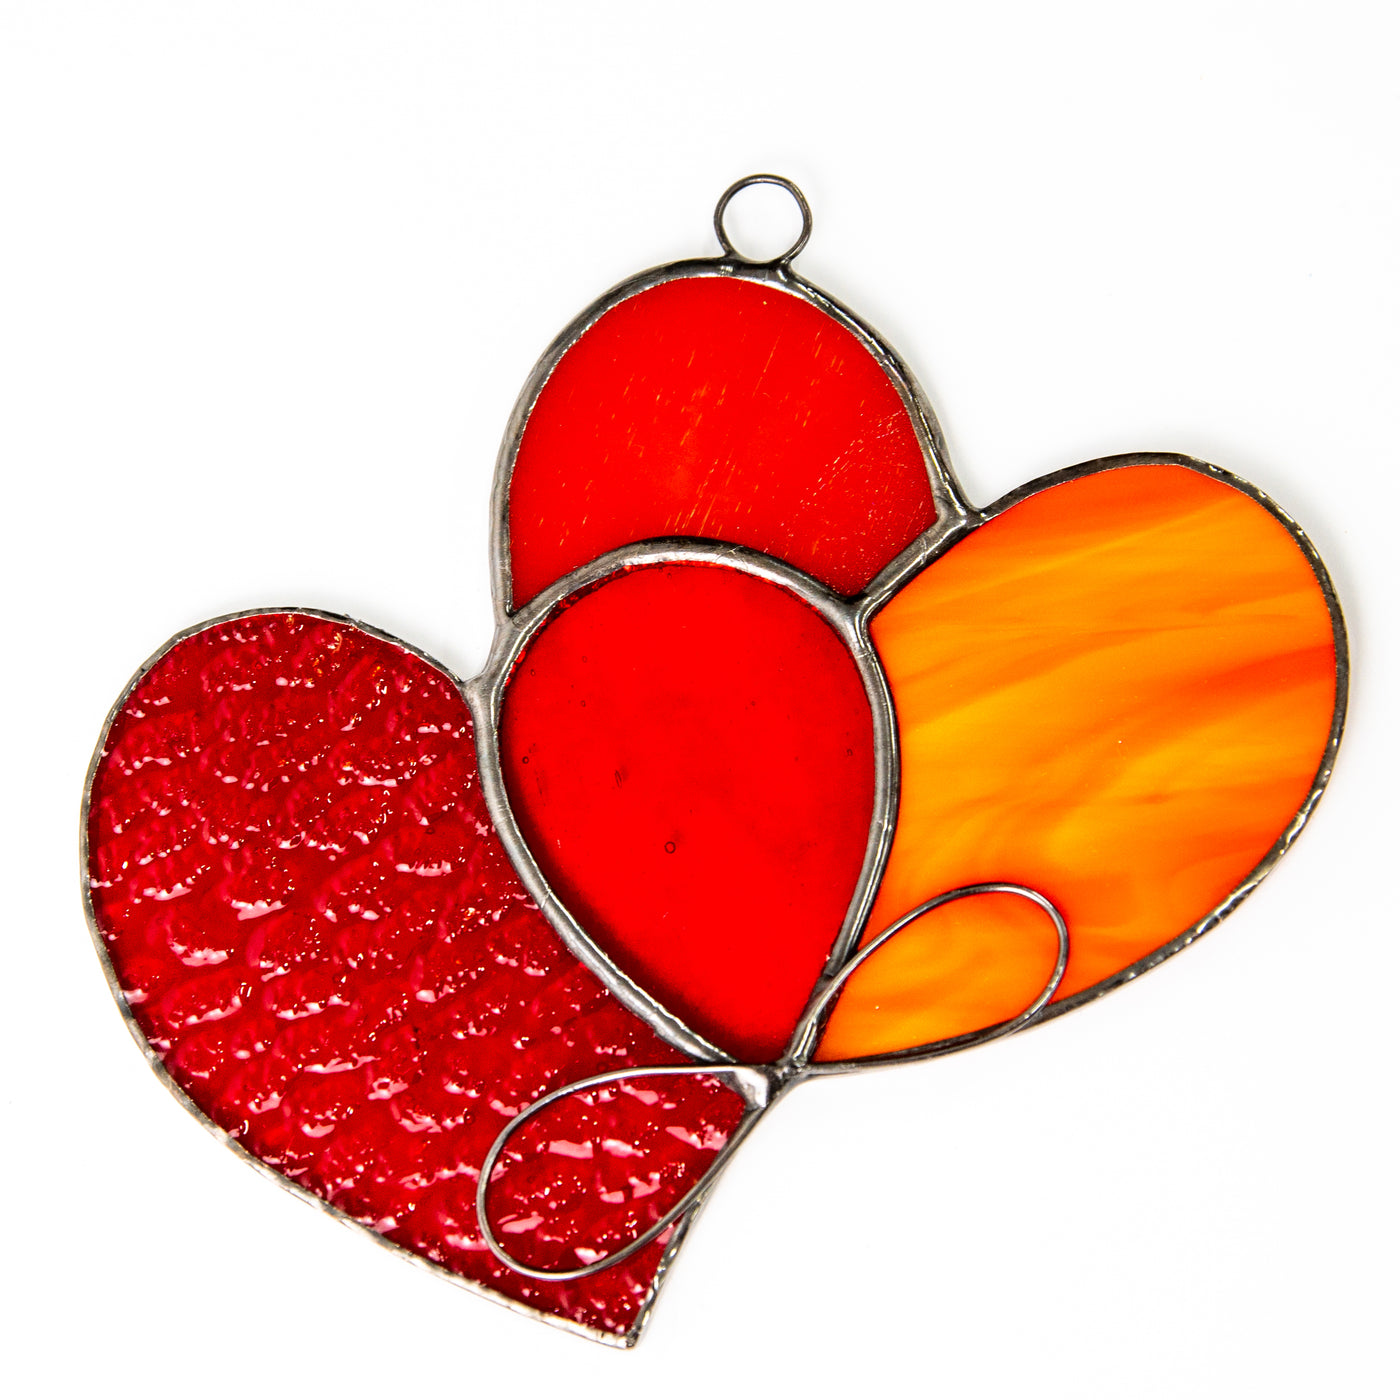 Stained glass suncatcher of two intertwined red hearts with the orange part